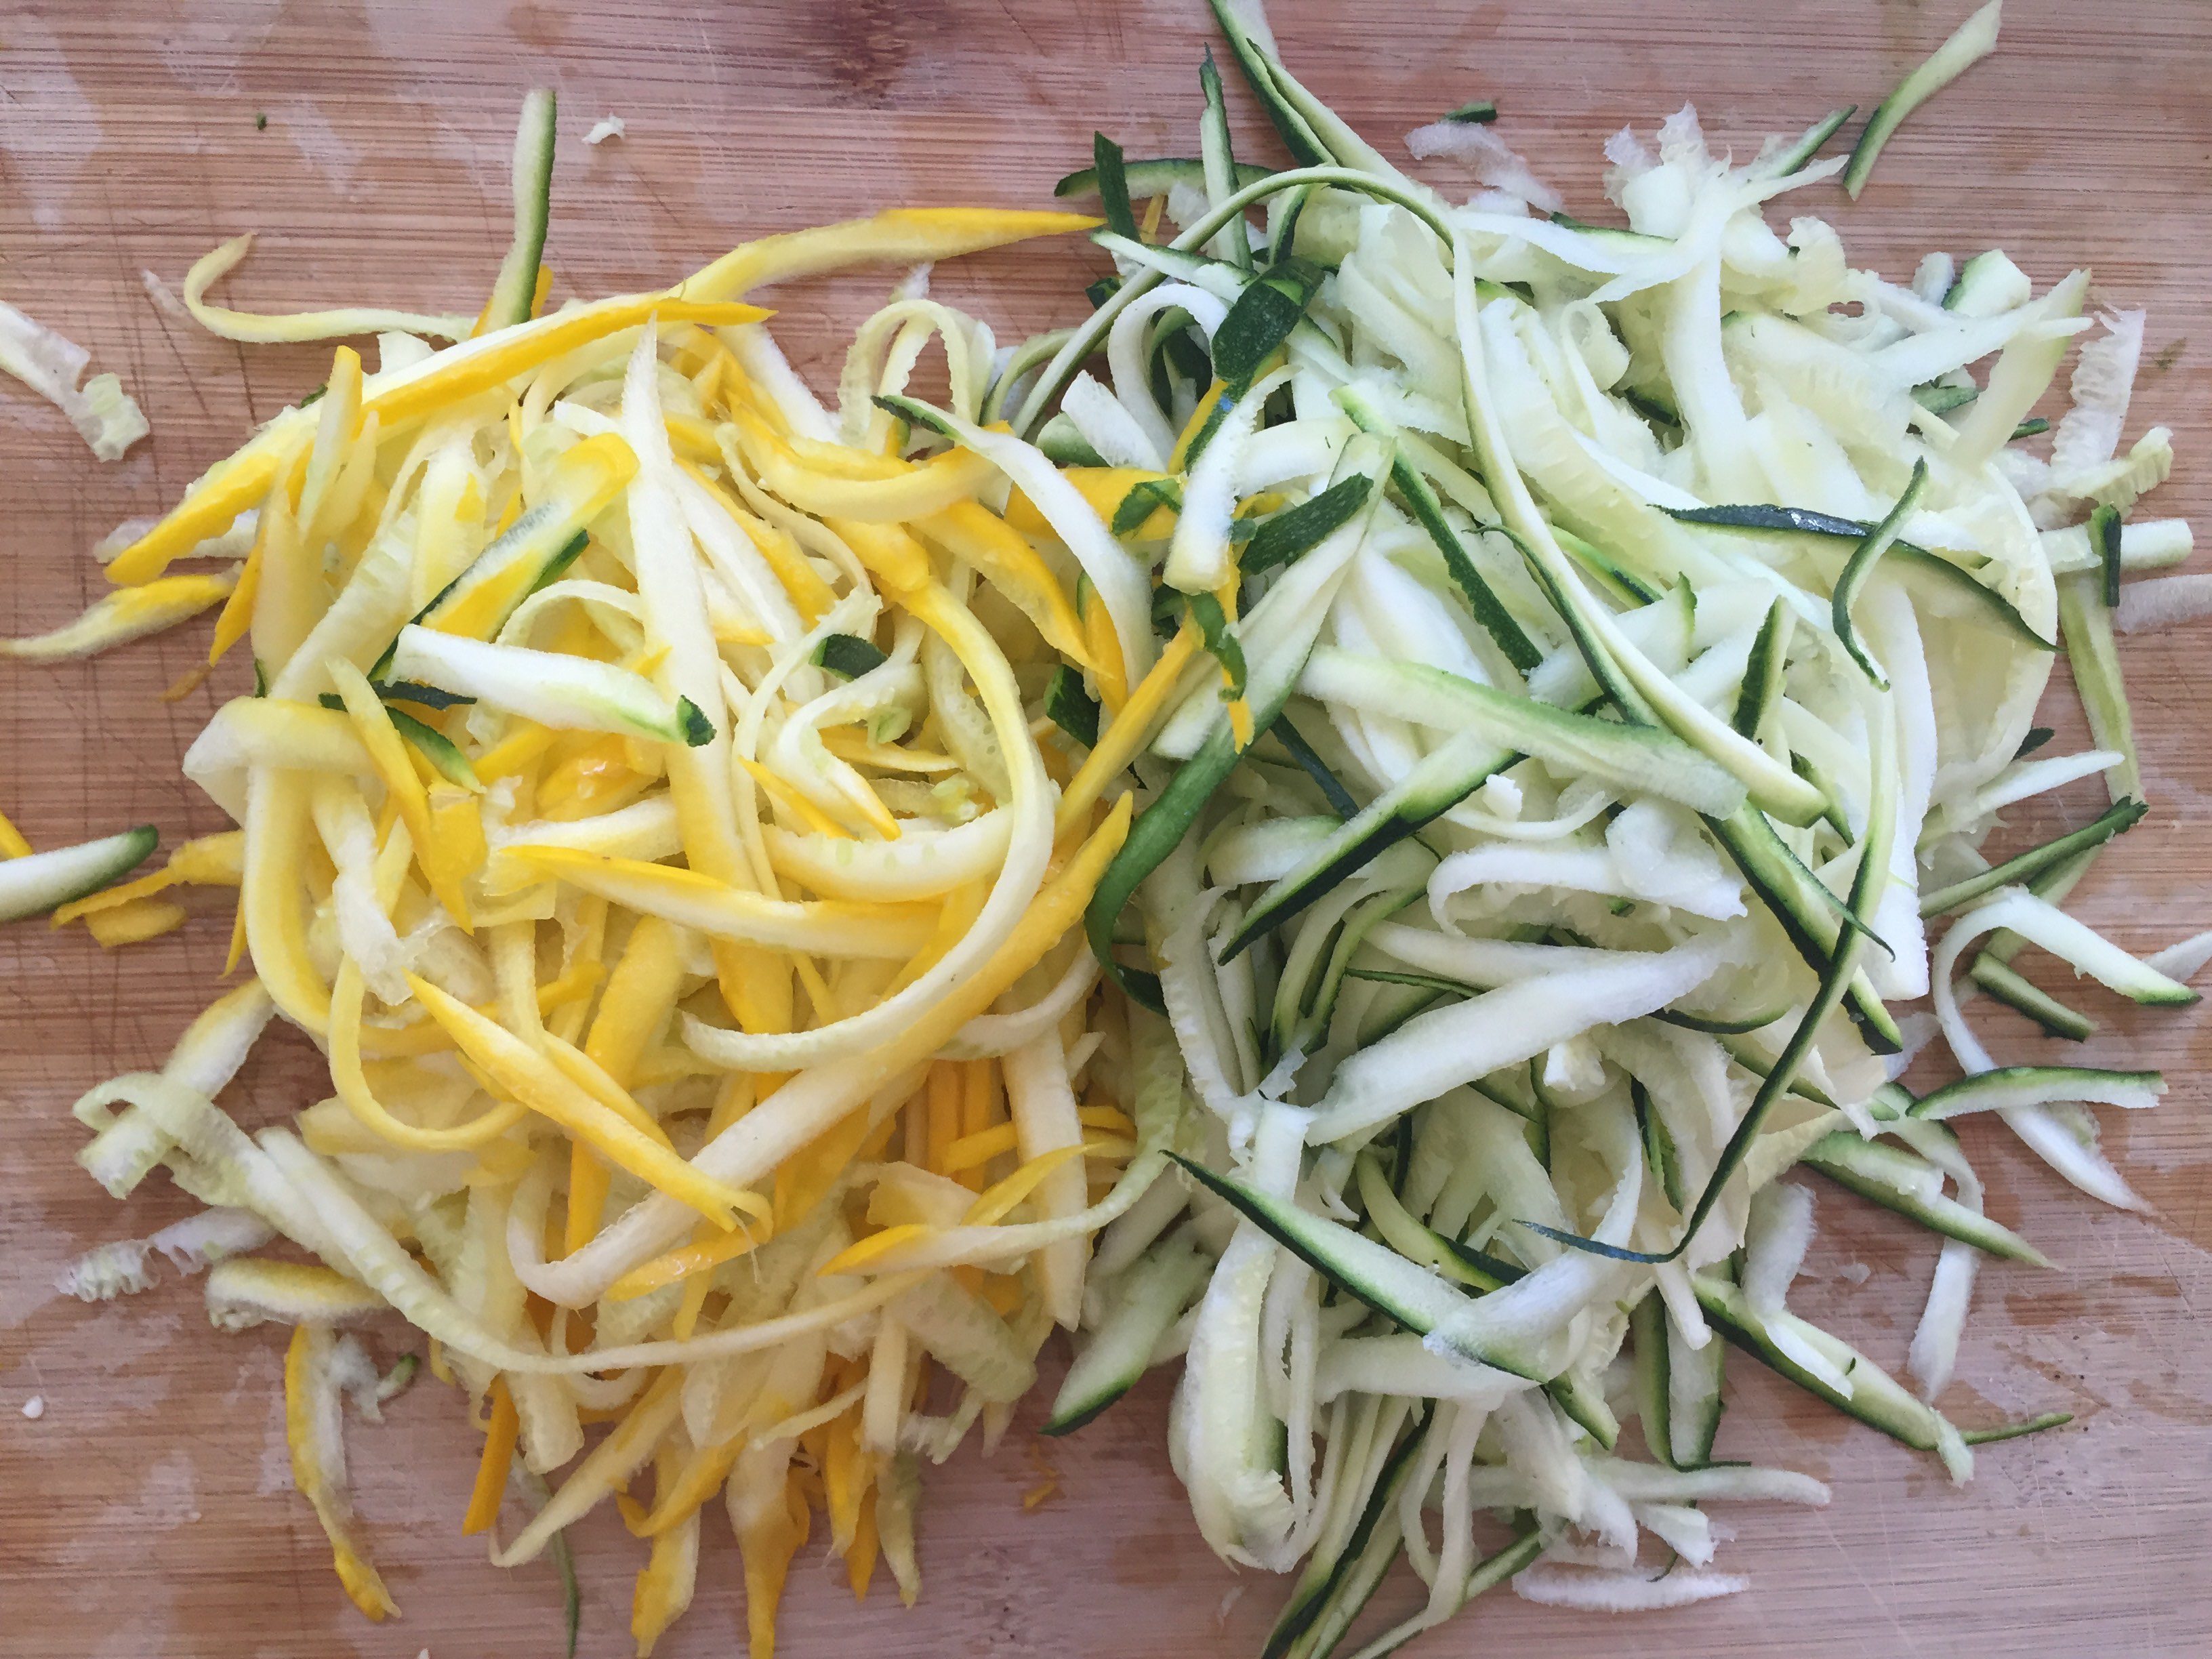 How to Make Veggie Noodles without a Spiralizer